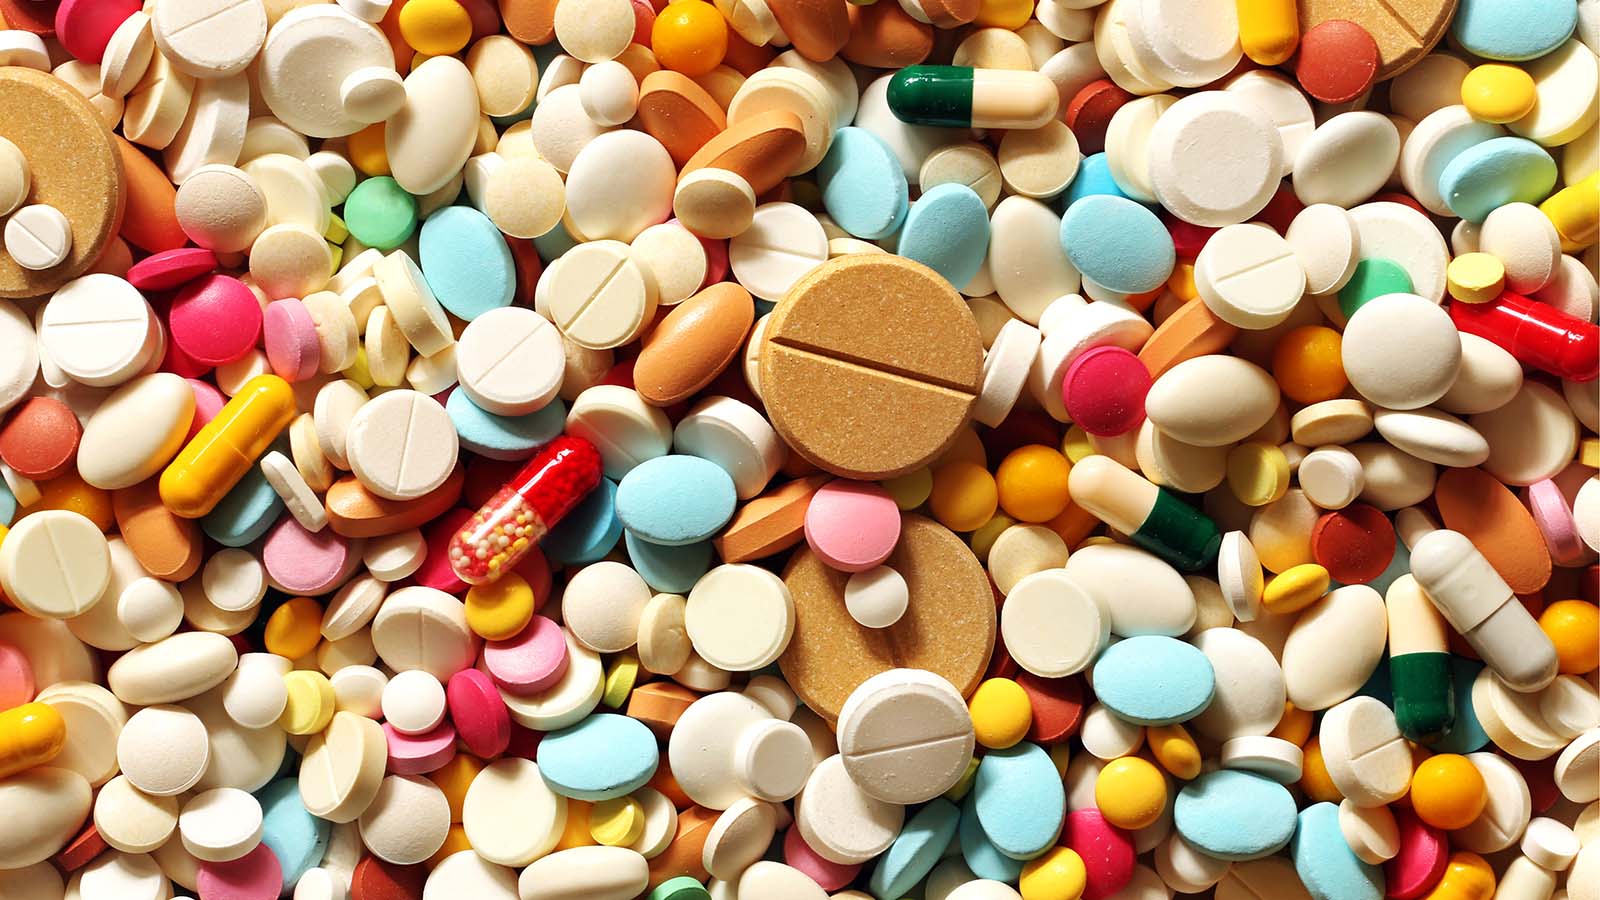 A pile of brightly colored pills in varying sizes and shapes representing IMUX stock.